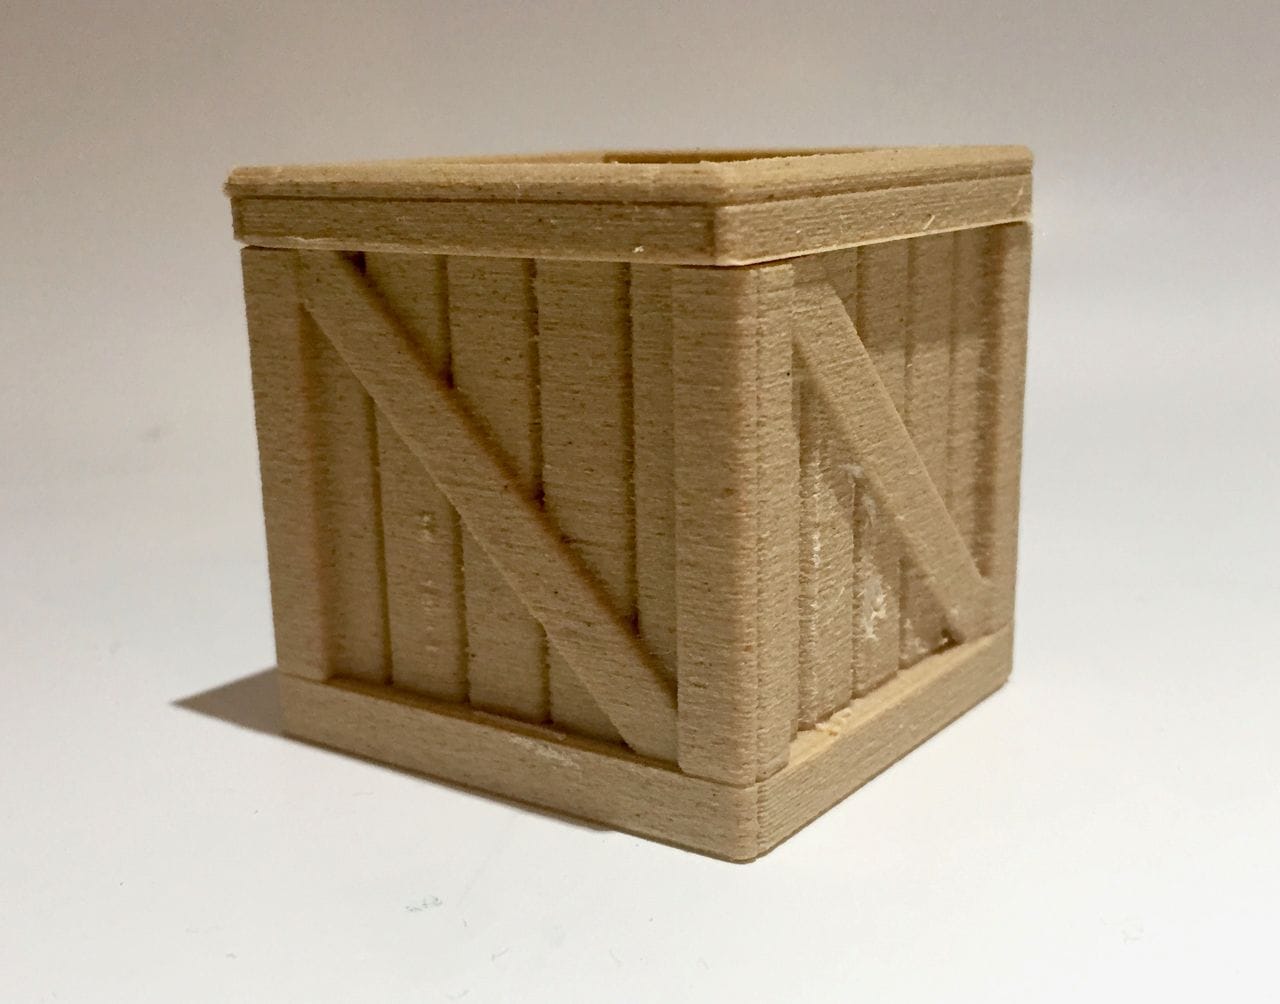  What else should one 3D print in wood? A crate, of course, using Fiberlogy's Fiberwood material 